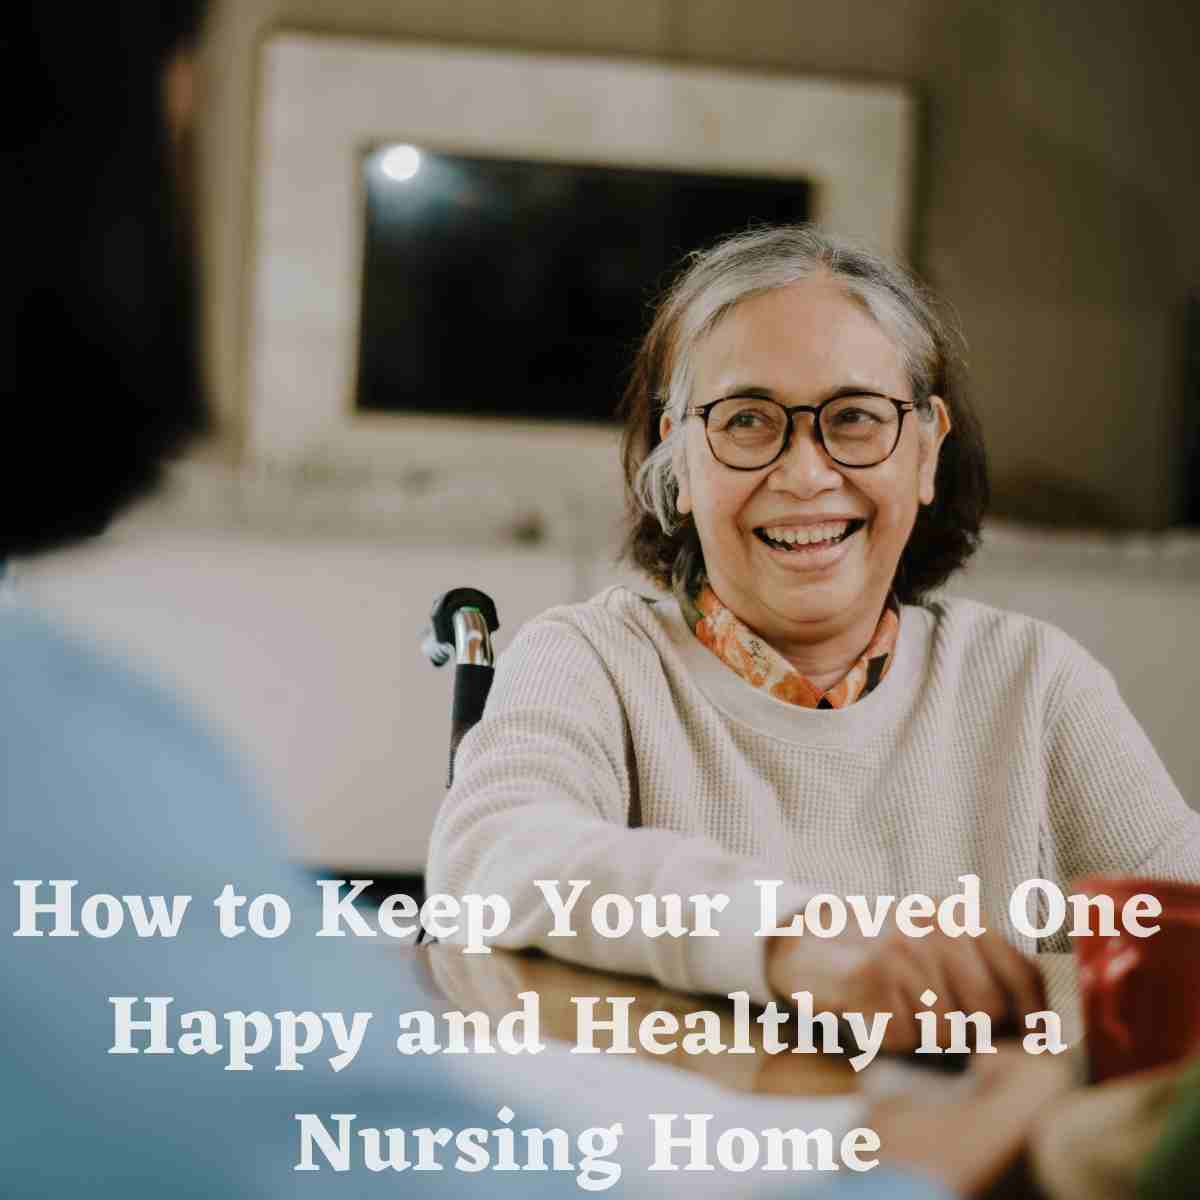 How to Keep Your Loved One Happy and Healthy in a Nursing Home